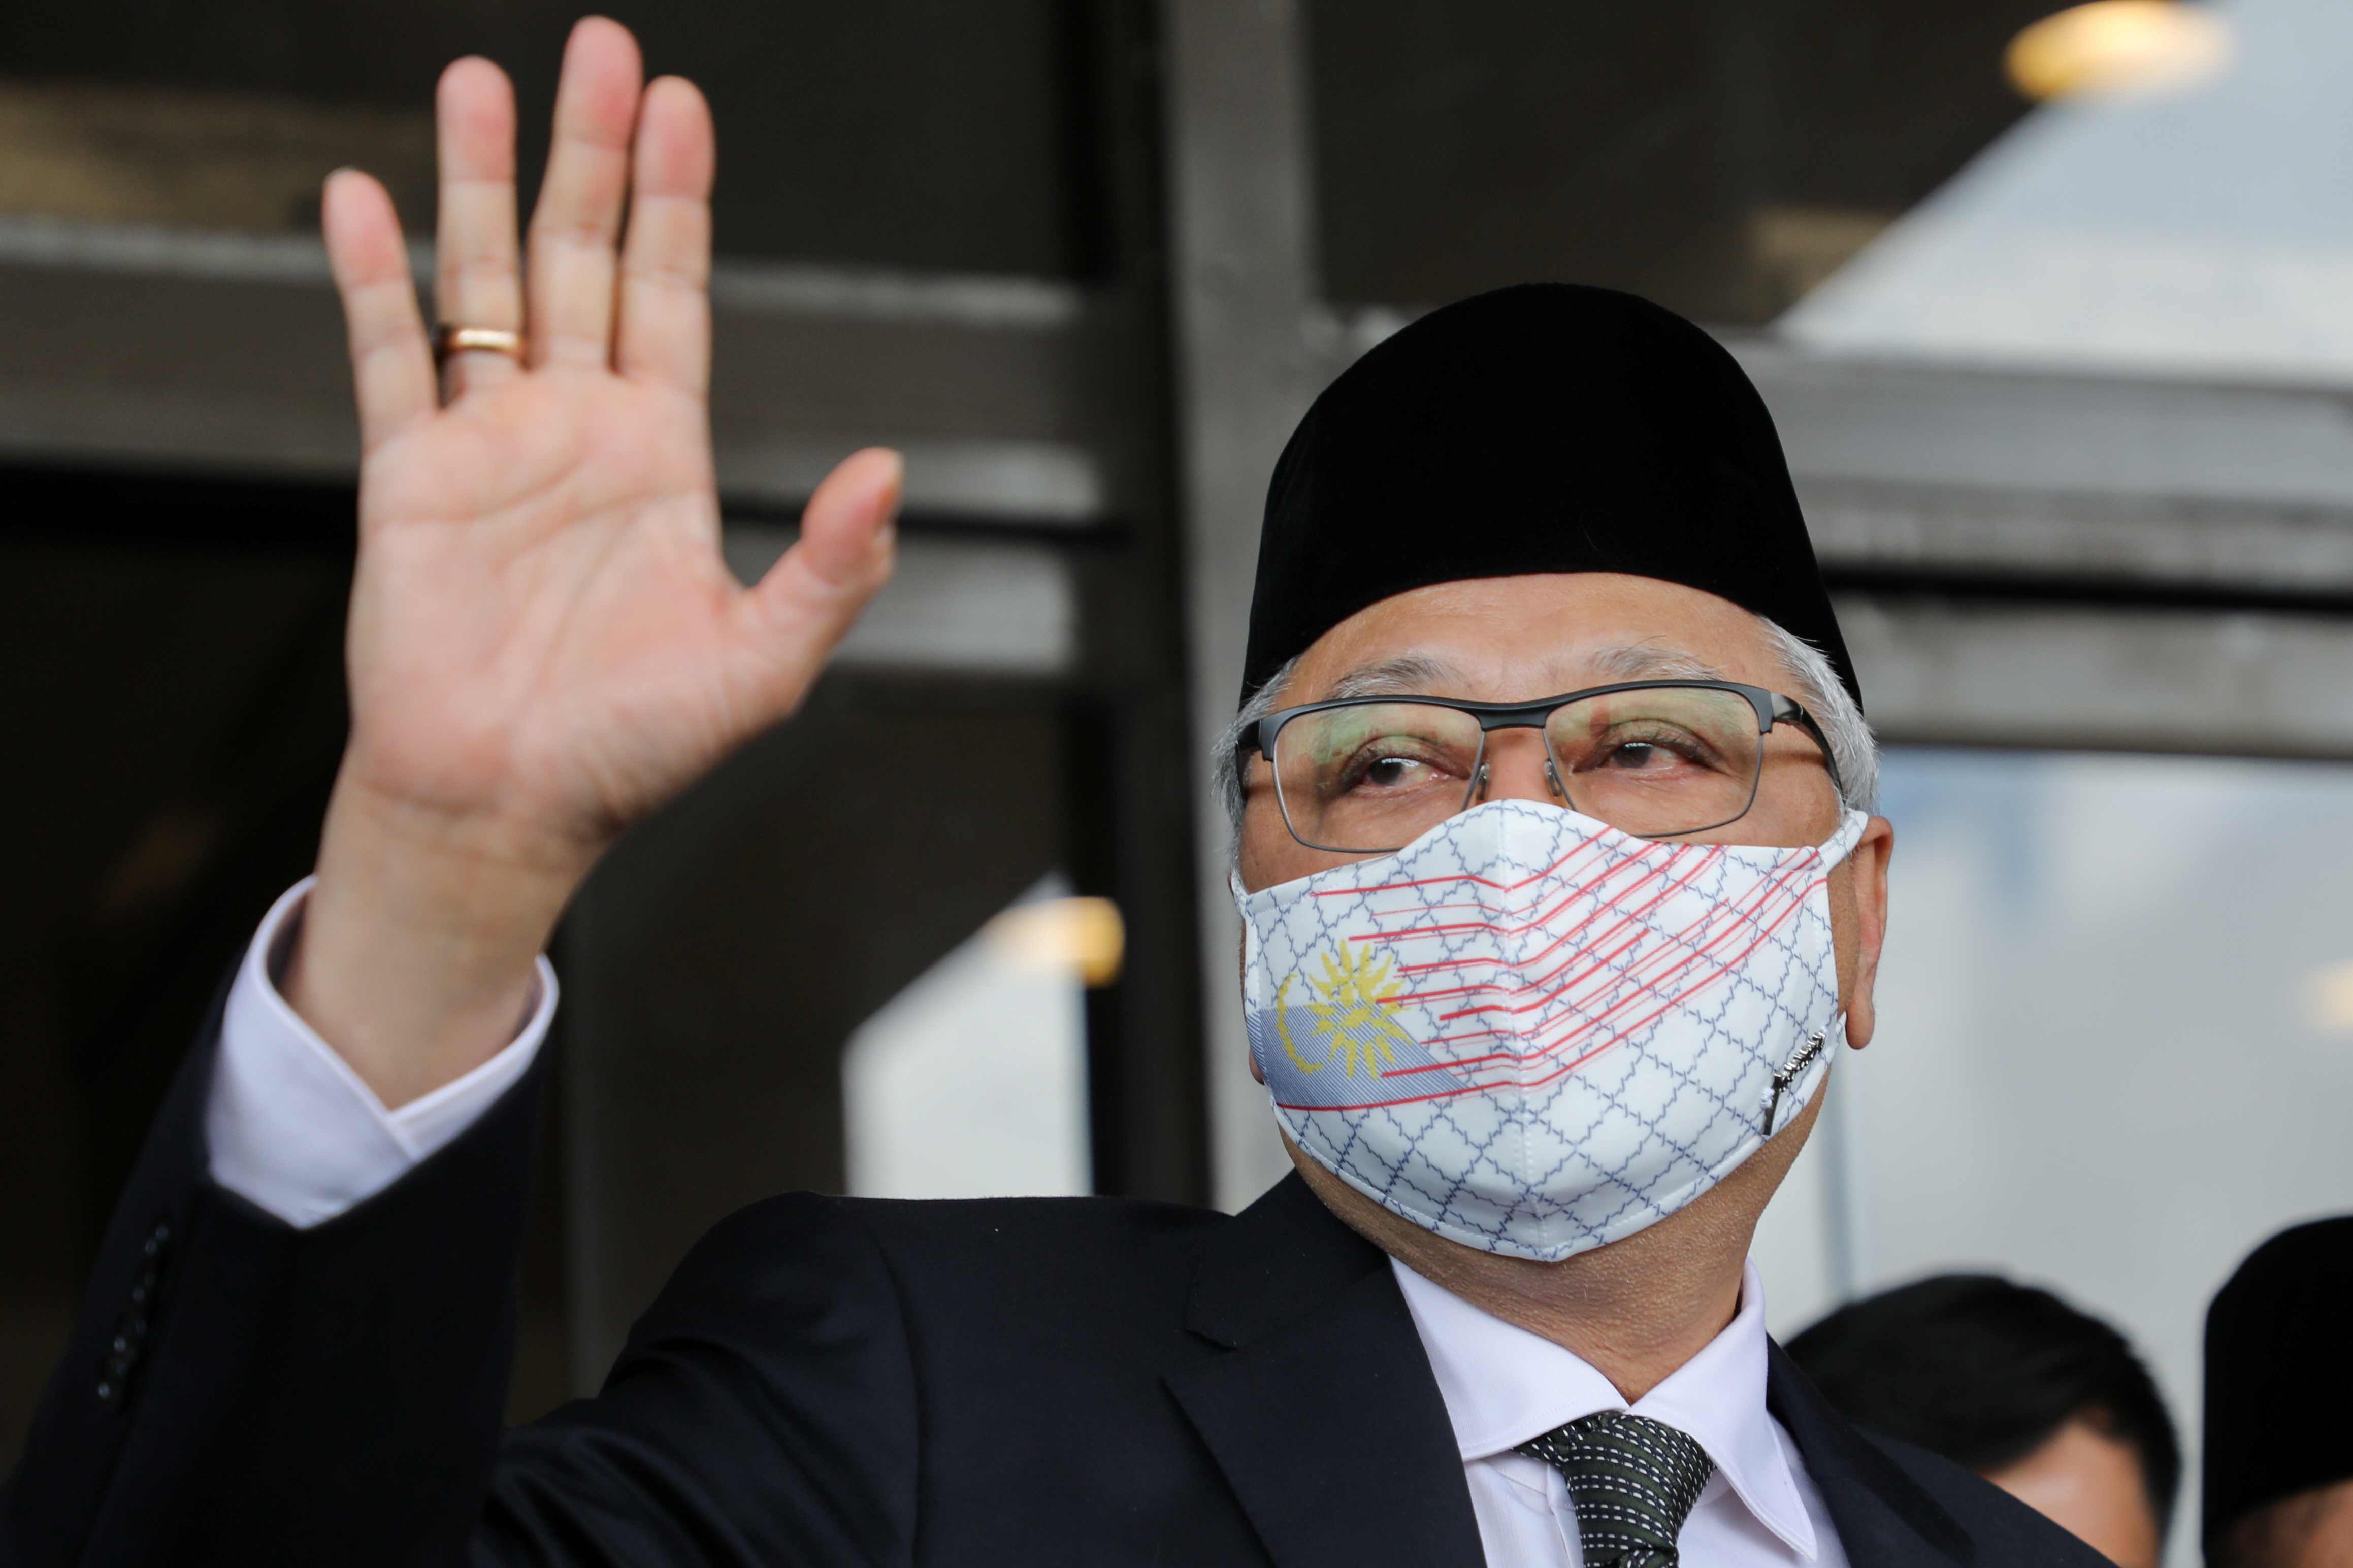 Former Malaysian Deputy Prime Minister Ismail Sabri Yaakob waves to members of the media before departing for a meeting with the King, in Kuala Lumpur